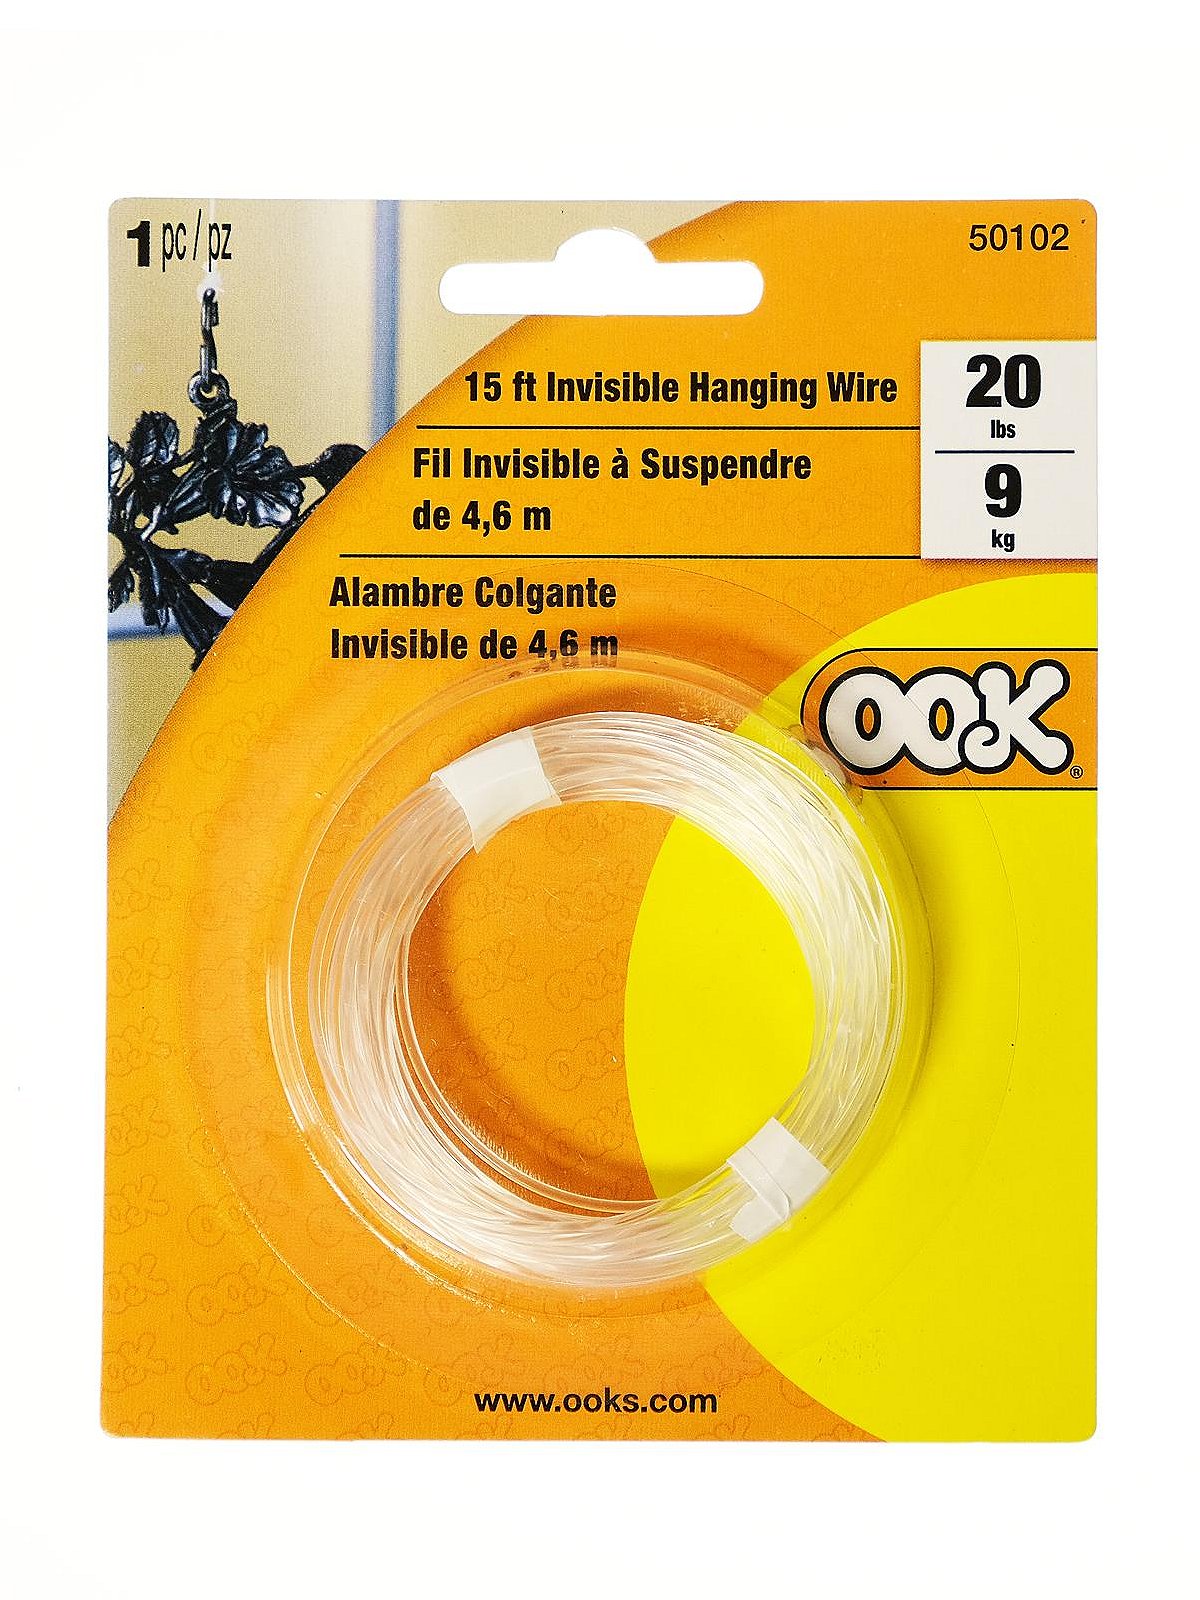 OOK Invisible Hanging Wire - 20 lb